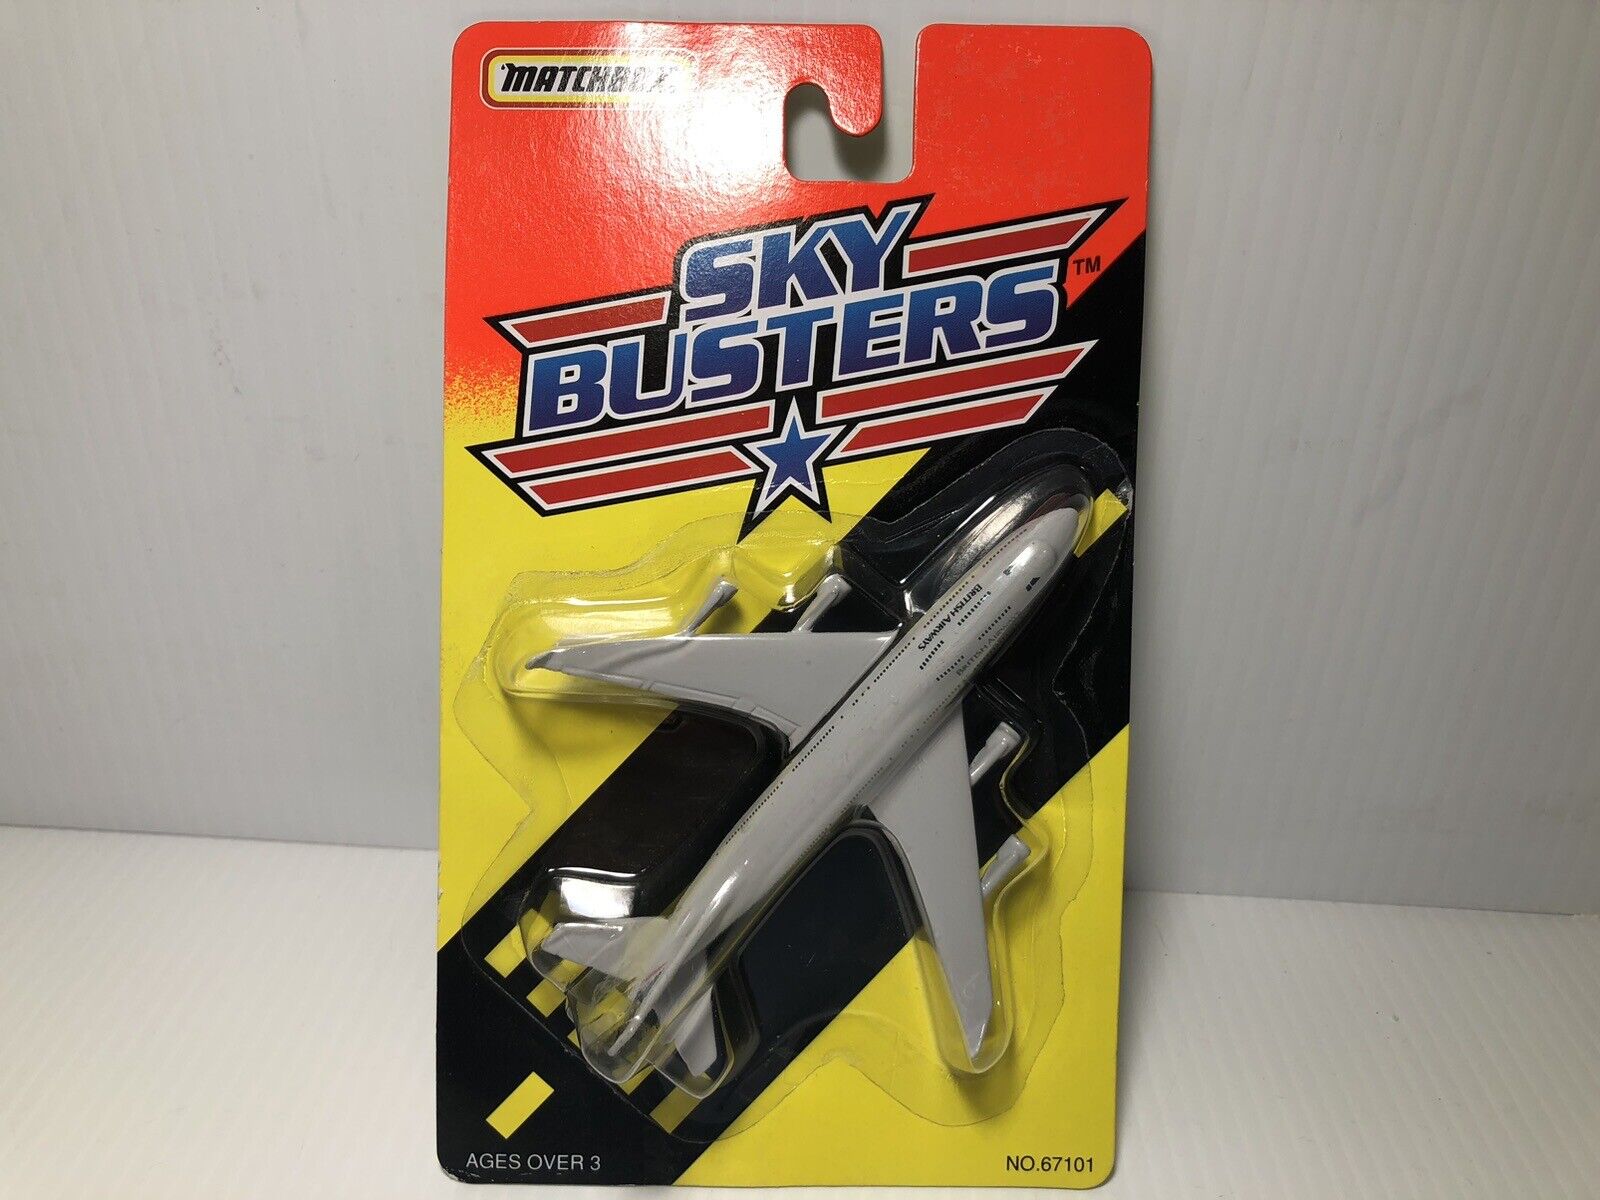 VINTAGE 1995 MATCHBOX (TYCO) SKYBUSTERS BOING 747 BRITTISH AIRLINES BNIB